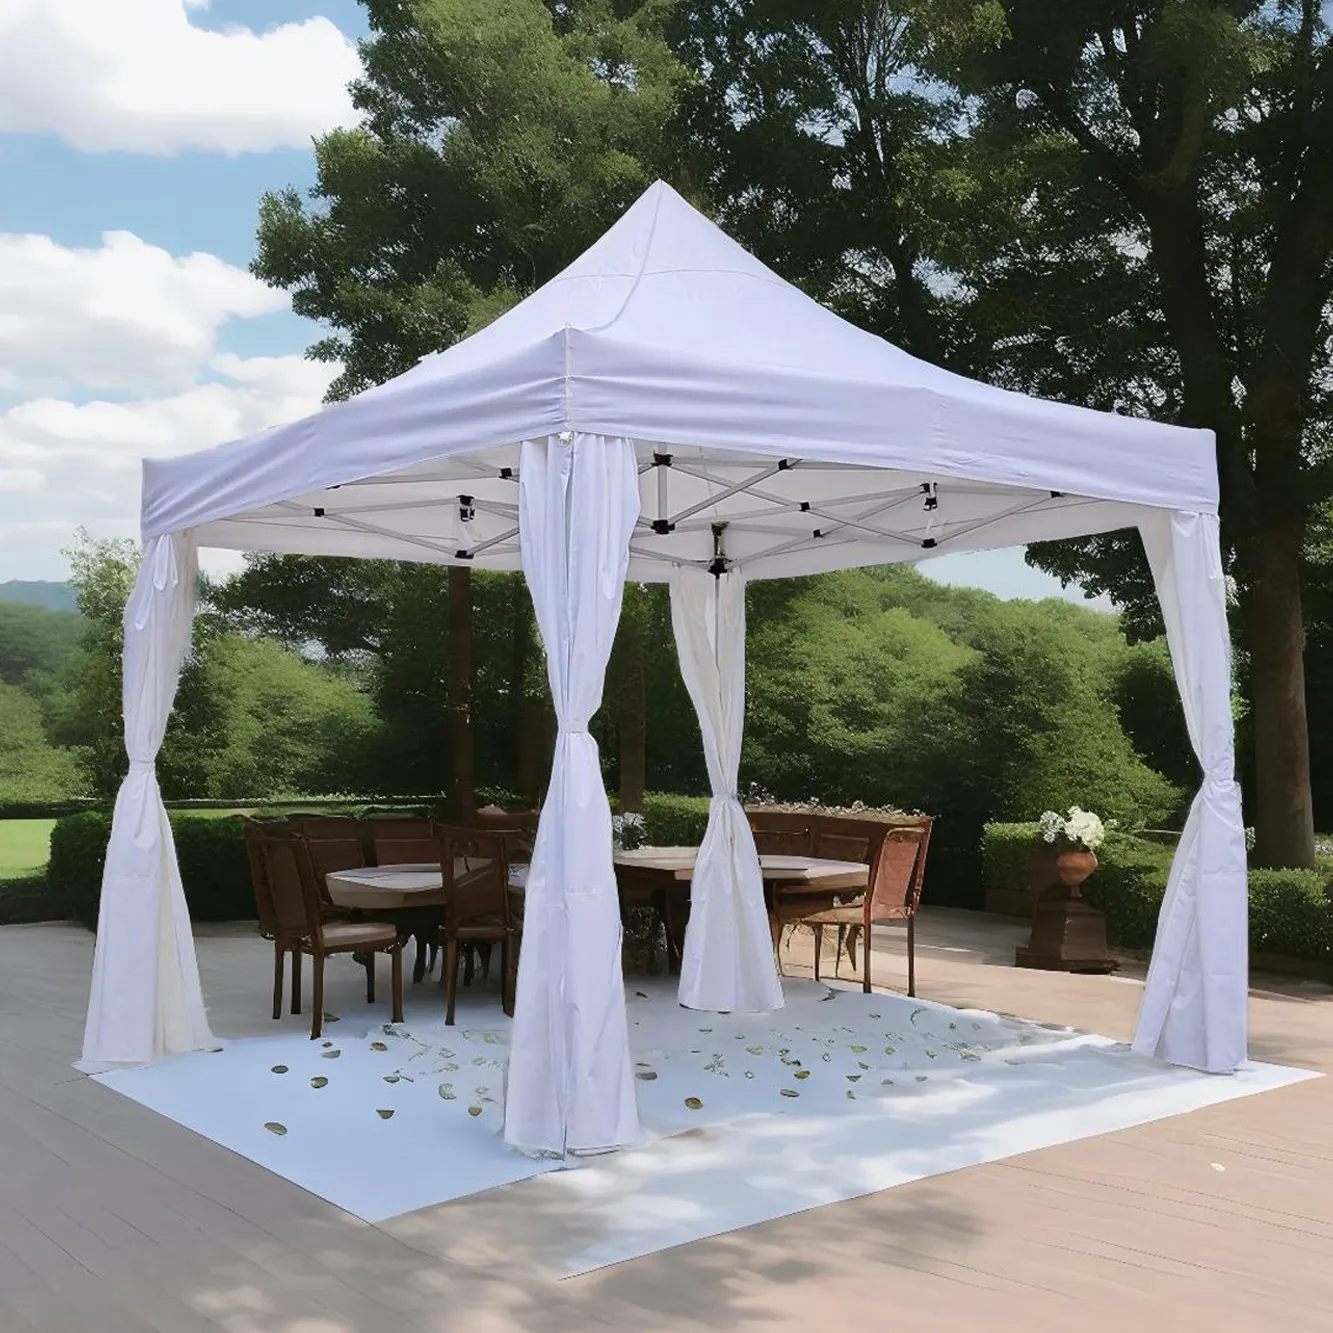 FEAMONT Party tent clear 10x10 3x3 aluminium structure waterproof canopy wedding tent pole and peg tents for wedding